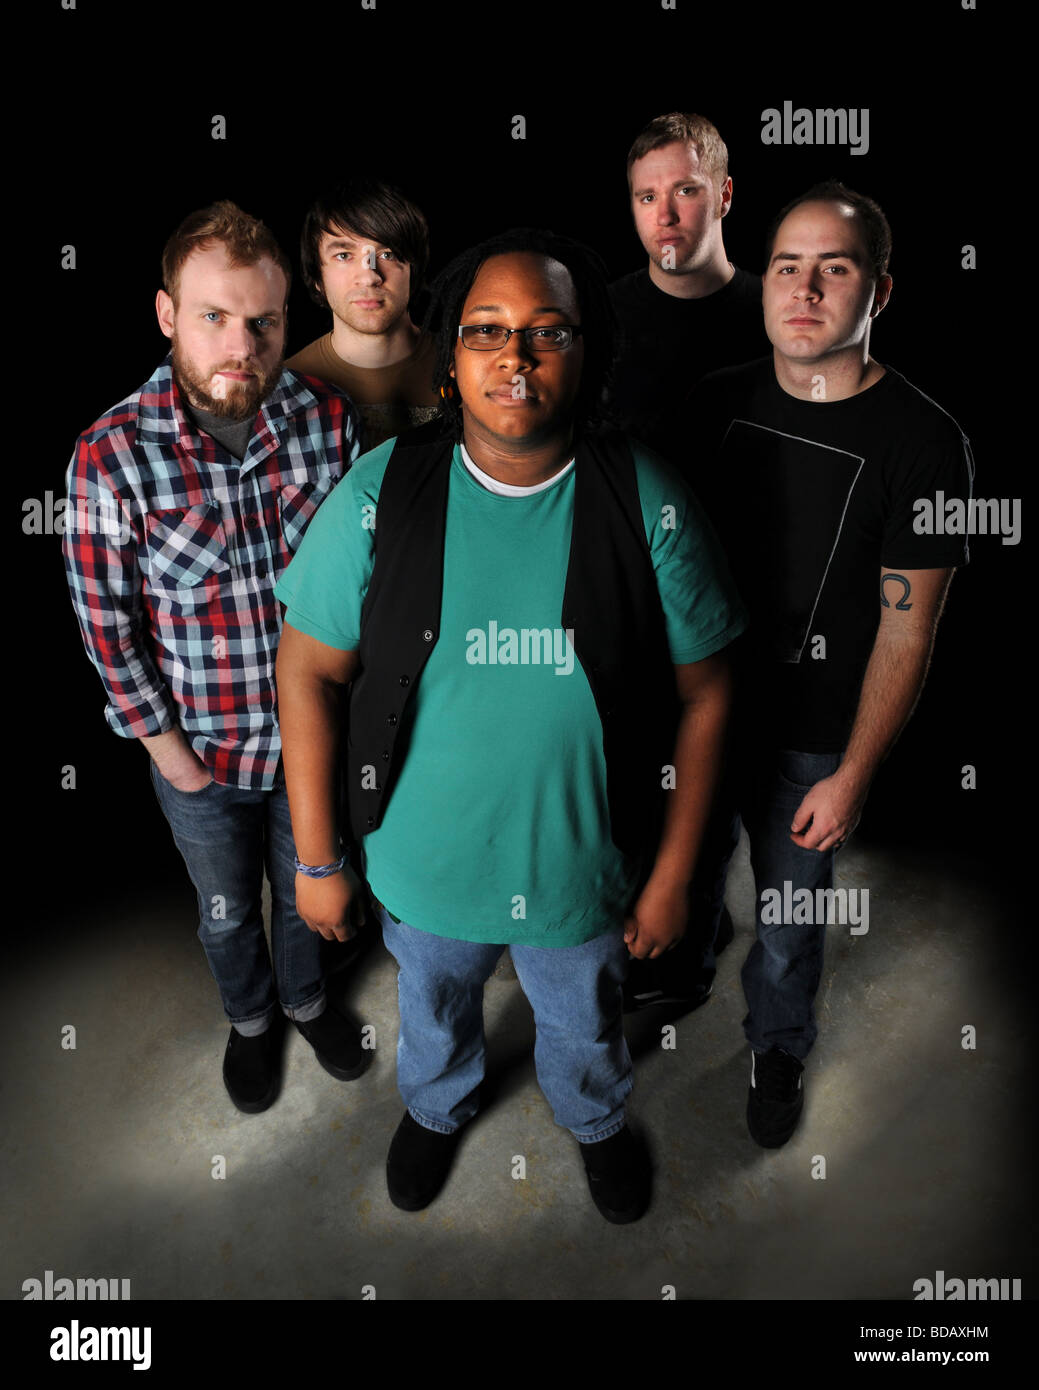 Five young men dressed in casual clothing standing over a dark background Stock Photo